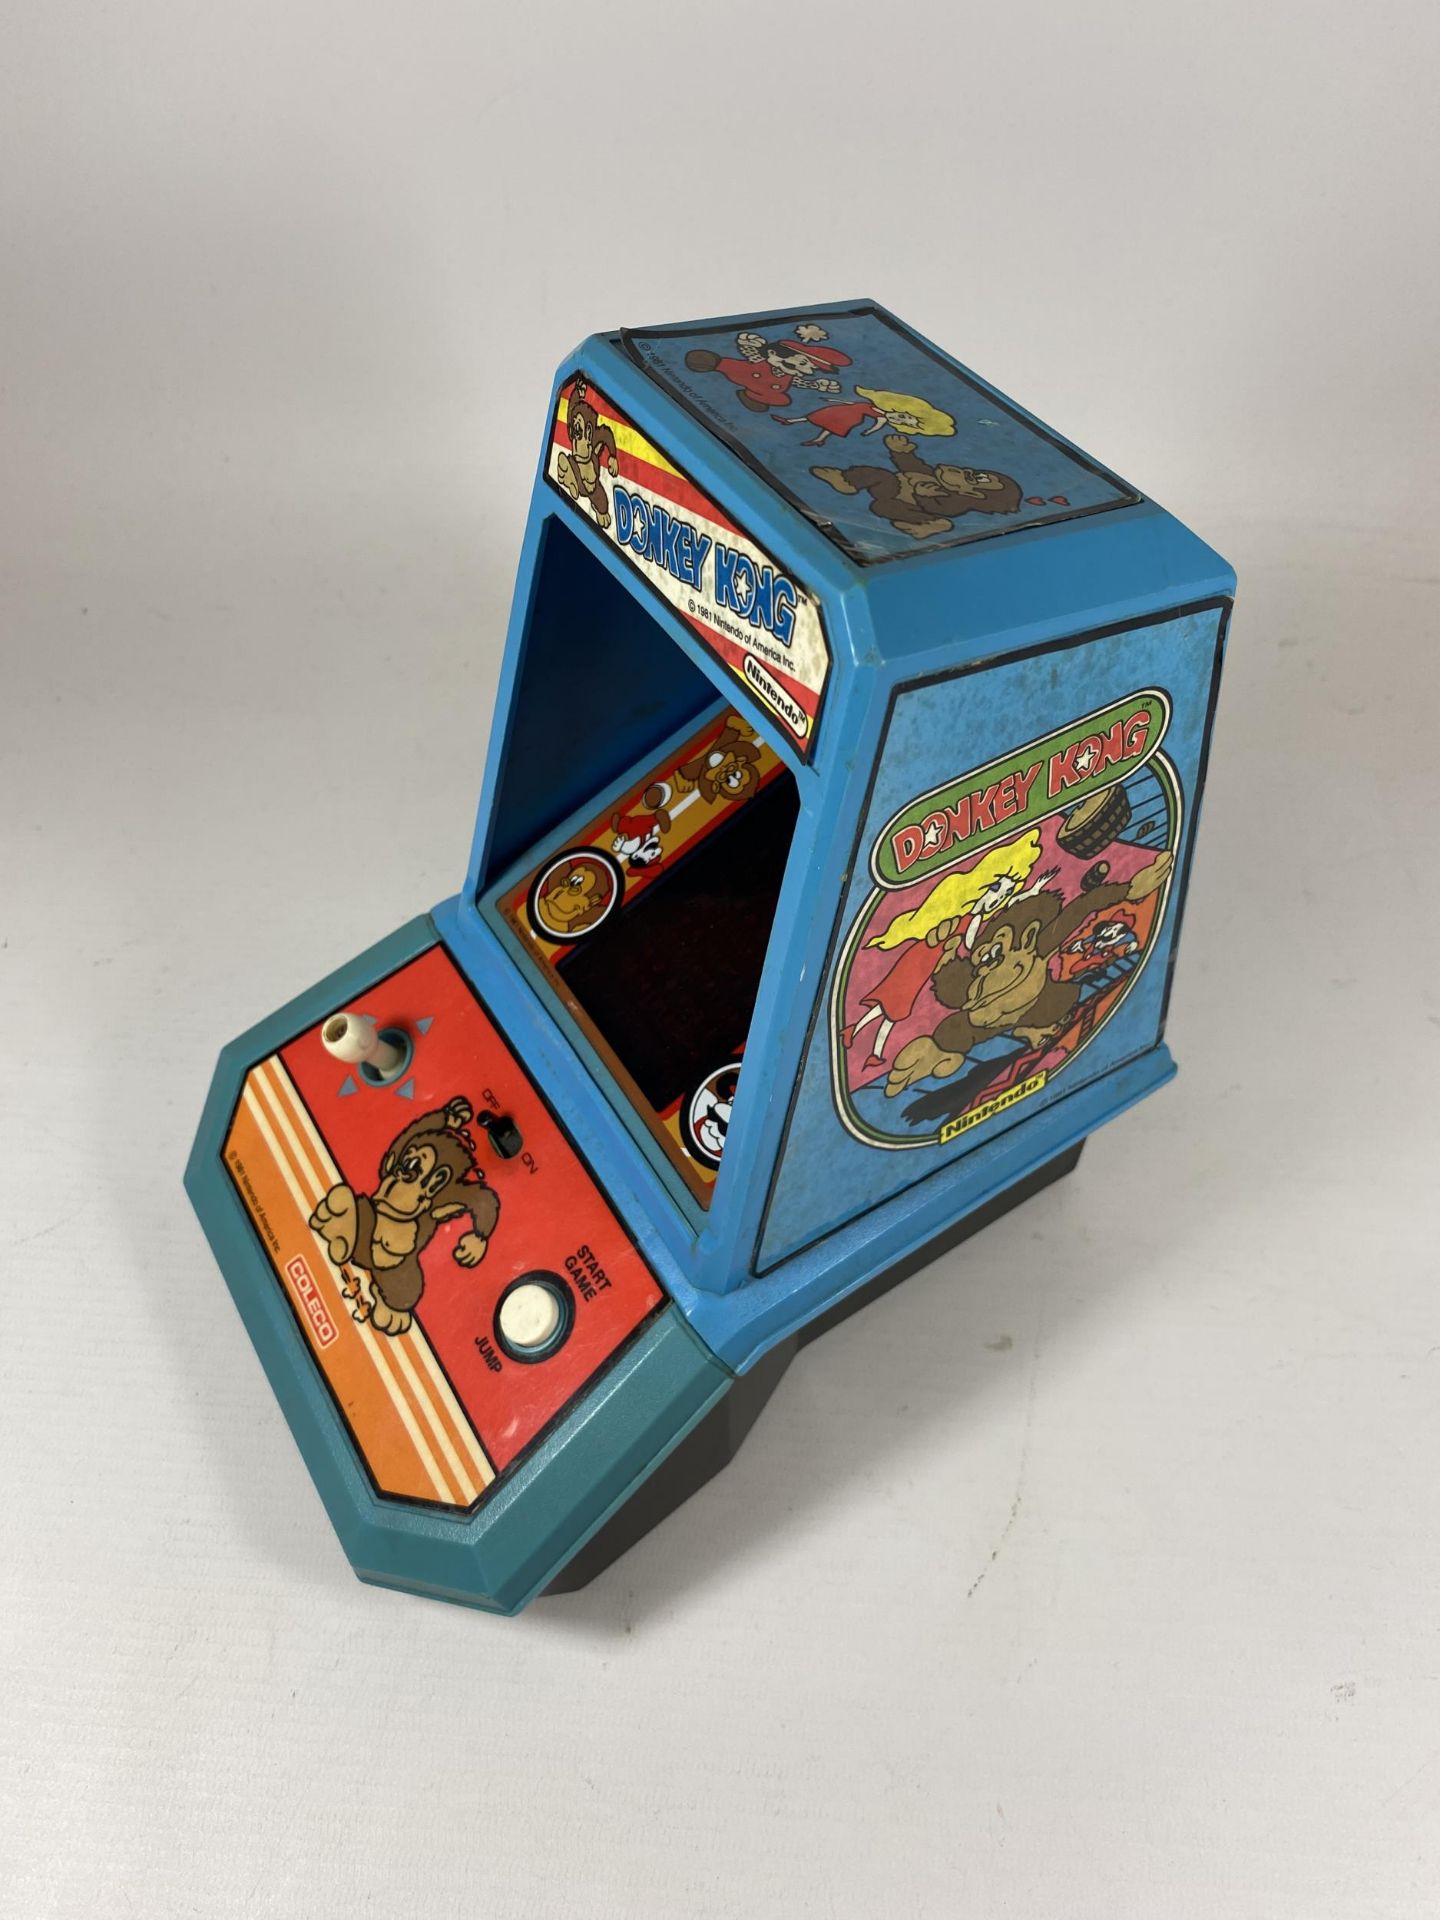 A RETRO 1981 COLECO DONKEY KONG TABLE TOP ARCADE GAME - Image 2 of 6